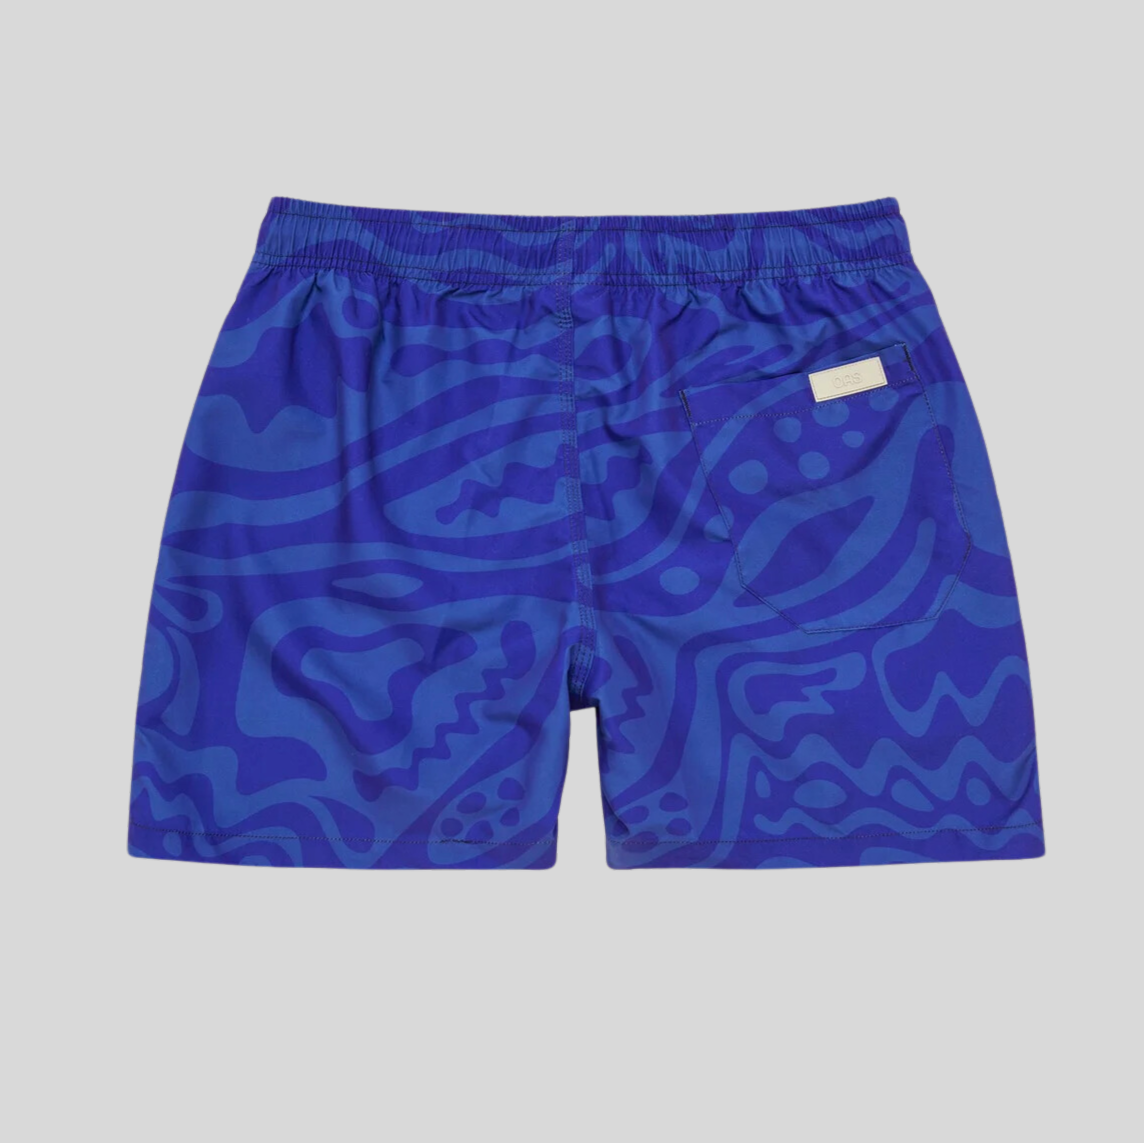 Gotstyle Fashion - OAS Shorts Flowing Abstract Print Swim Shorts - Blue